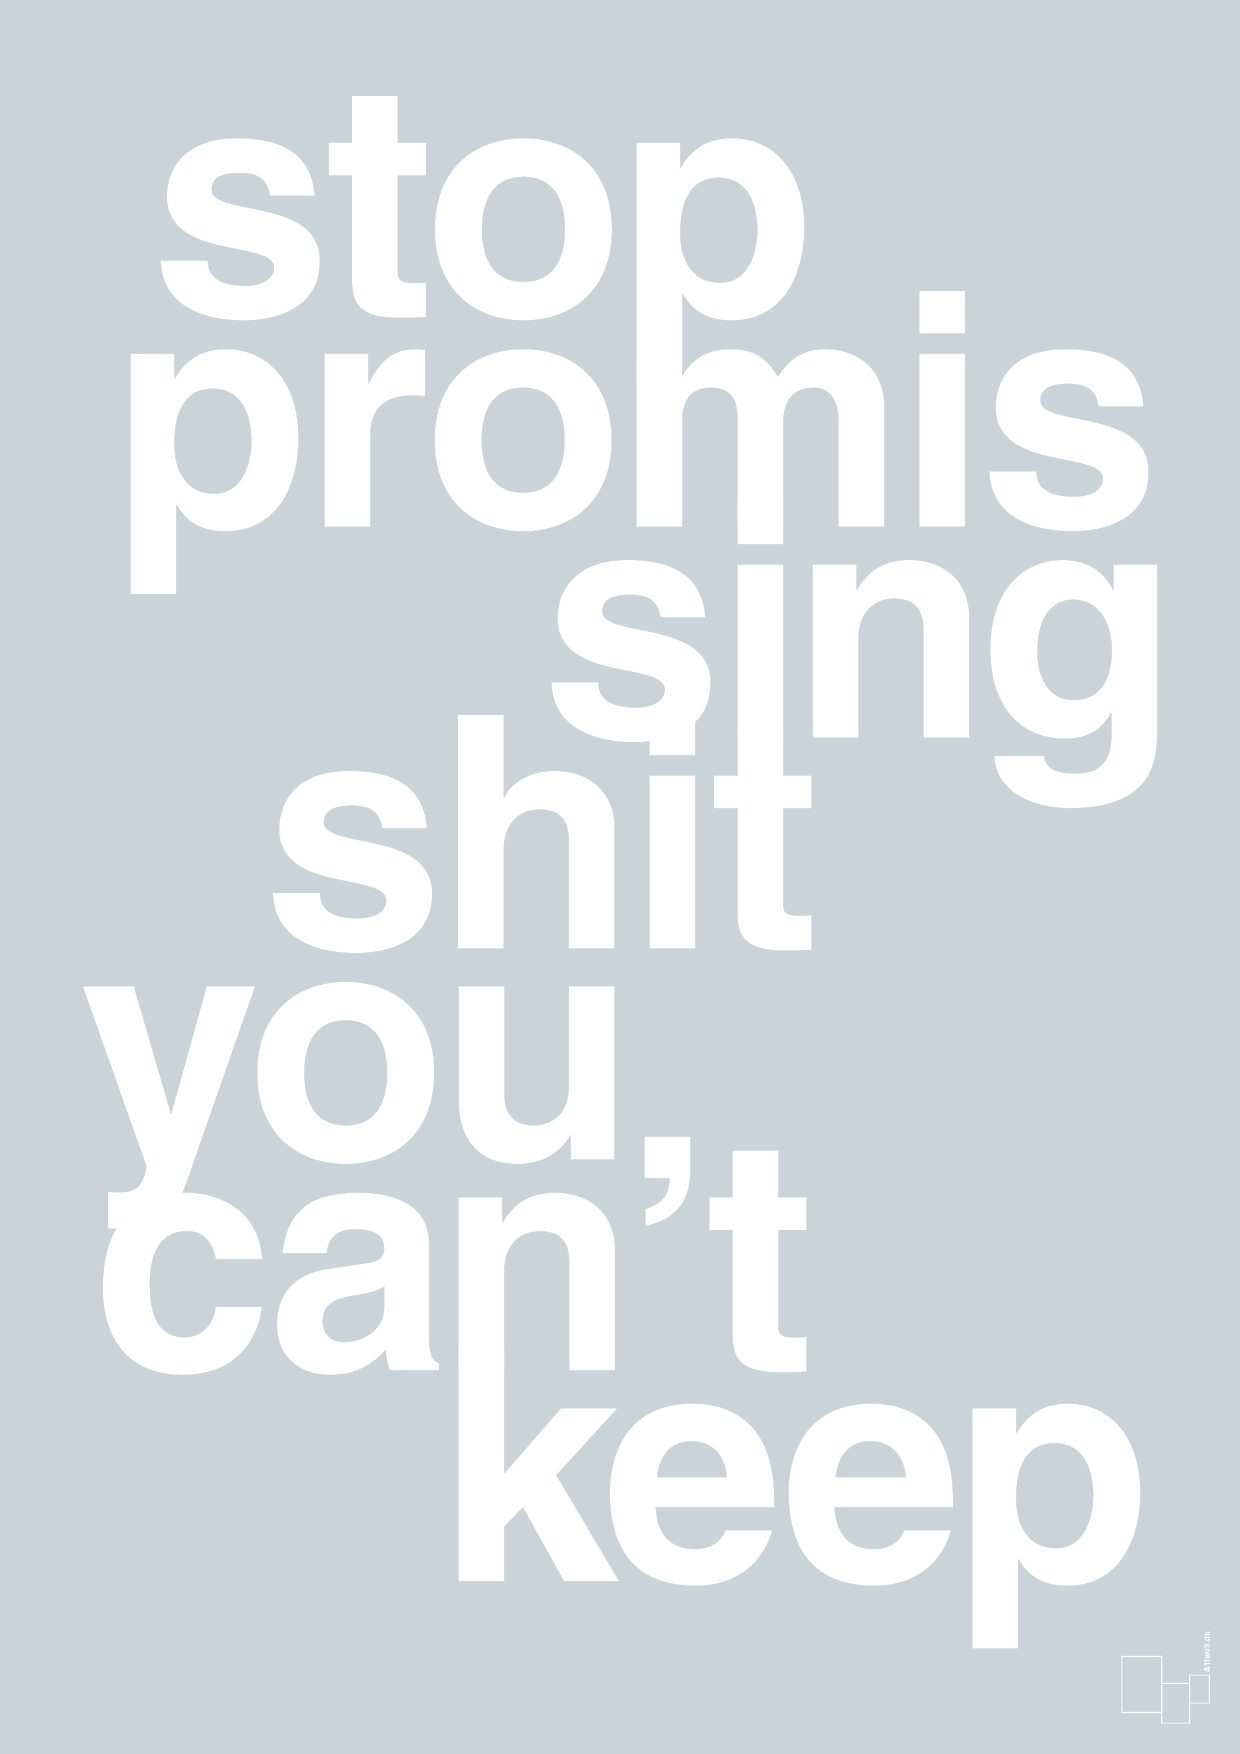 stop promissing shit you cant keep - Plakat med Ordsprog i Light Drizzle